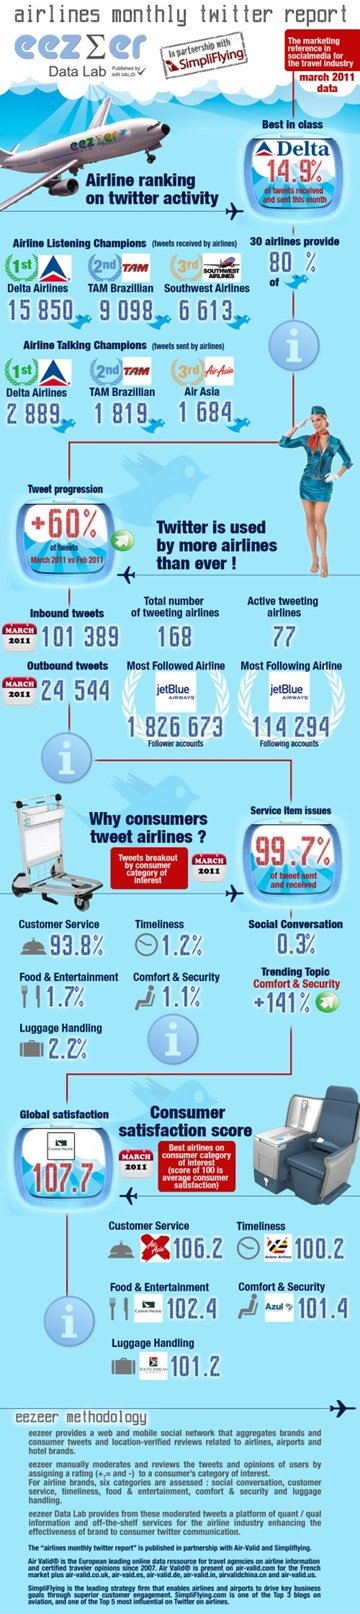 How airlines use Twitter infographic